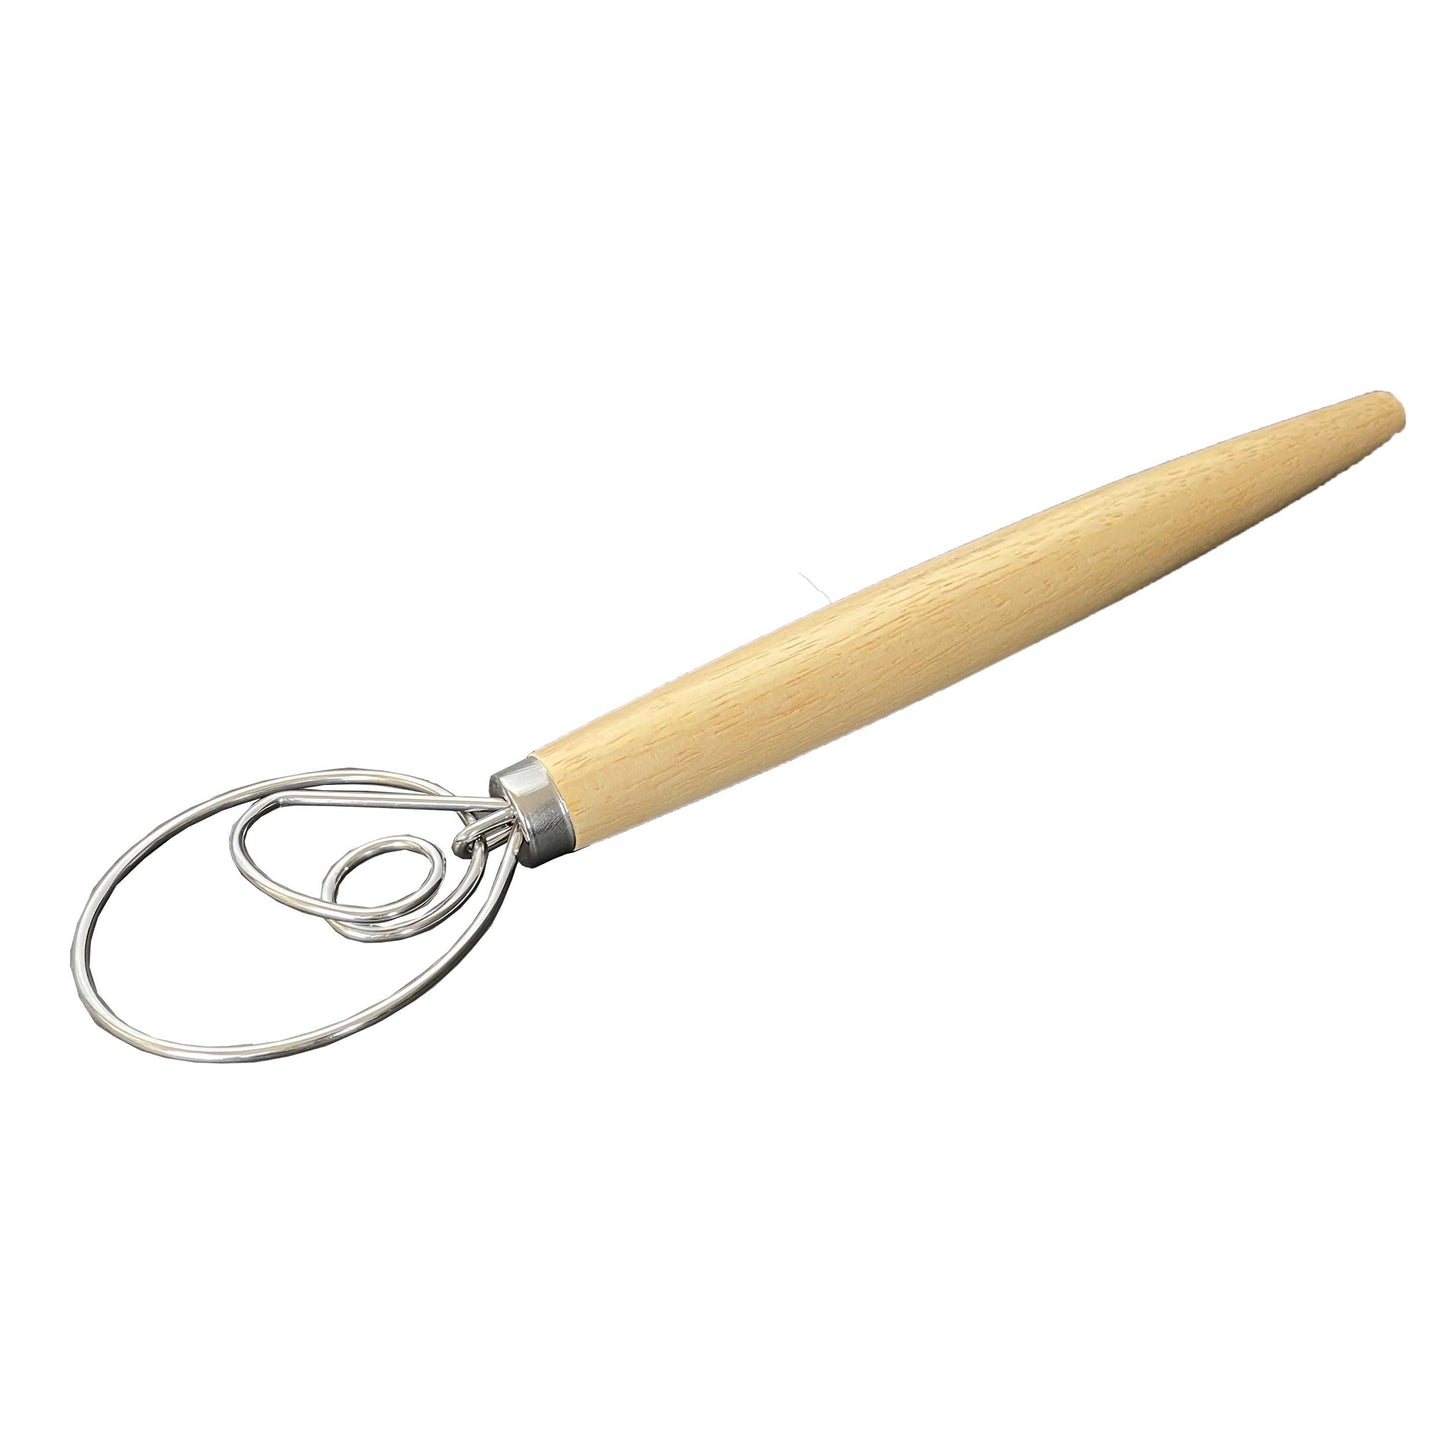 13" Danish Dough Whisk with wood handle